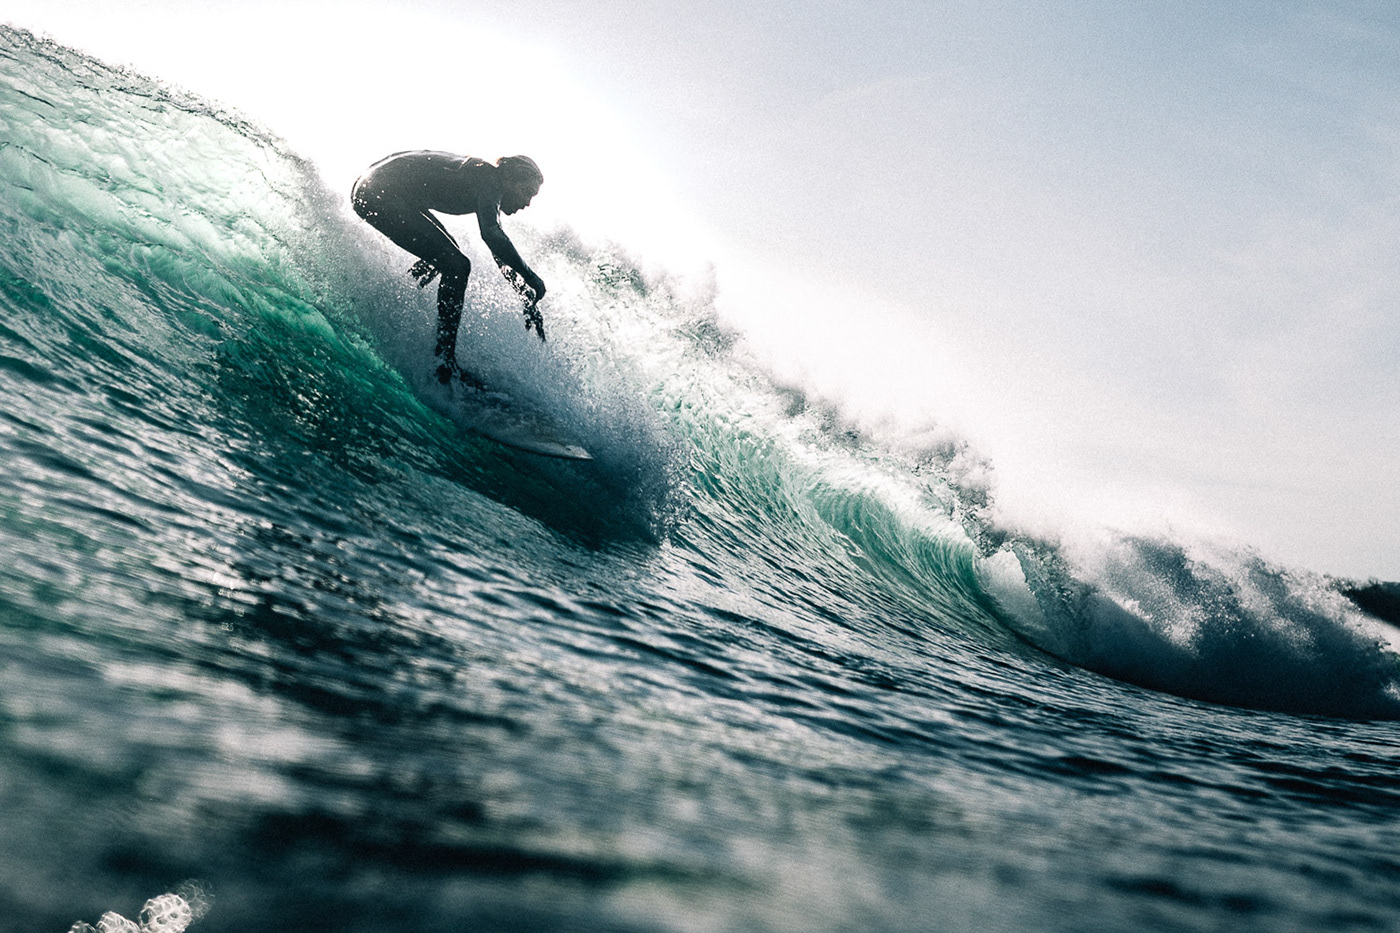 surfing lifestyle dicapac nicaragua surfer Ocean Canon sigma underwater Travel